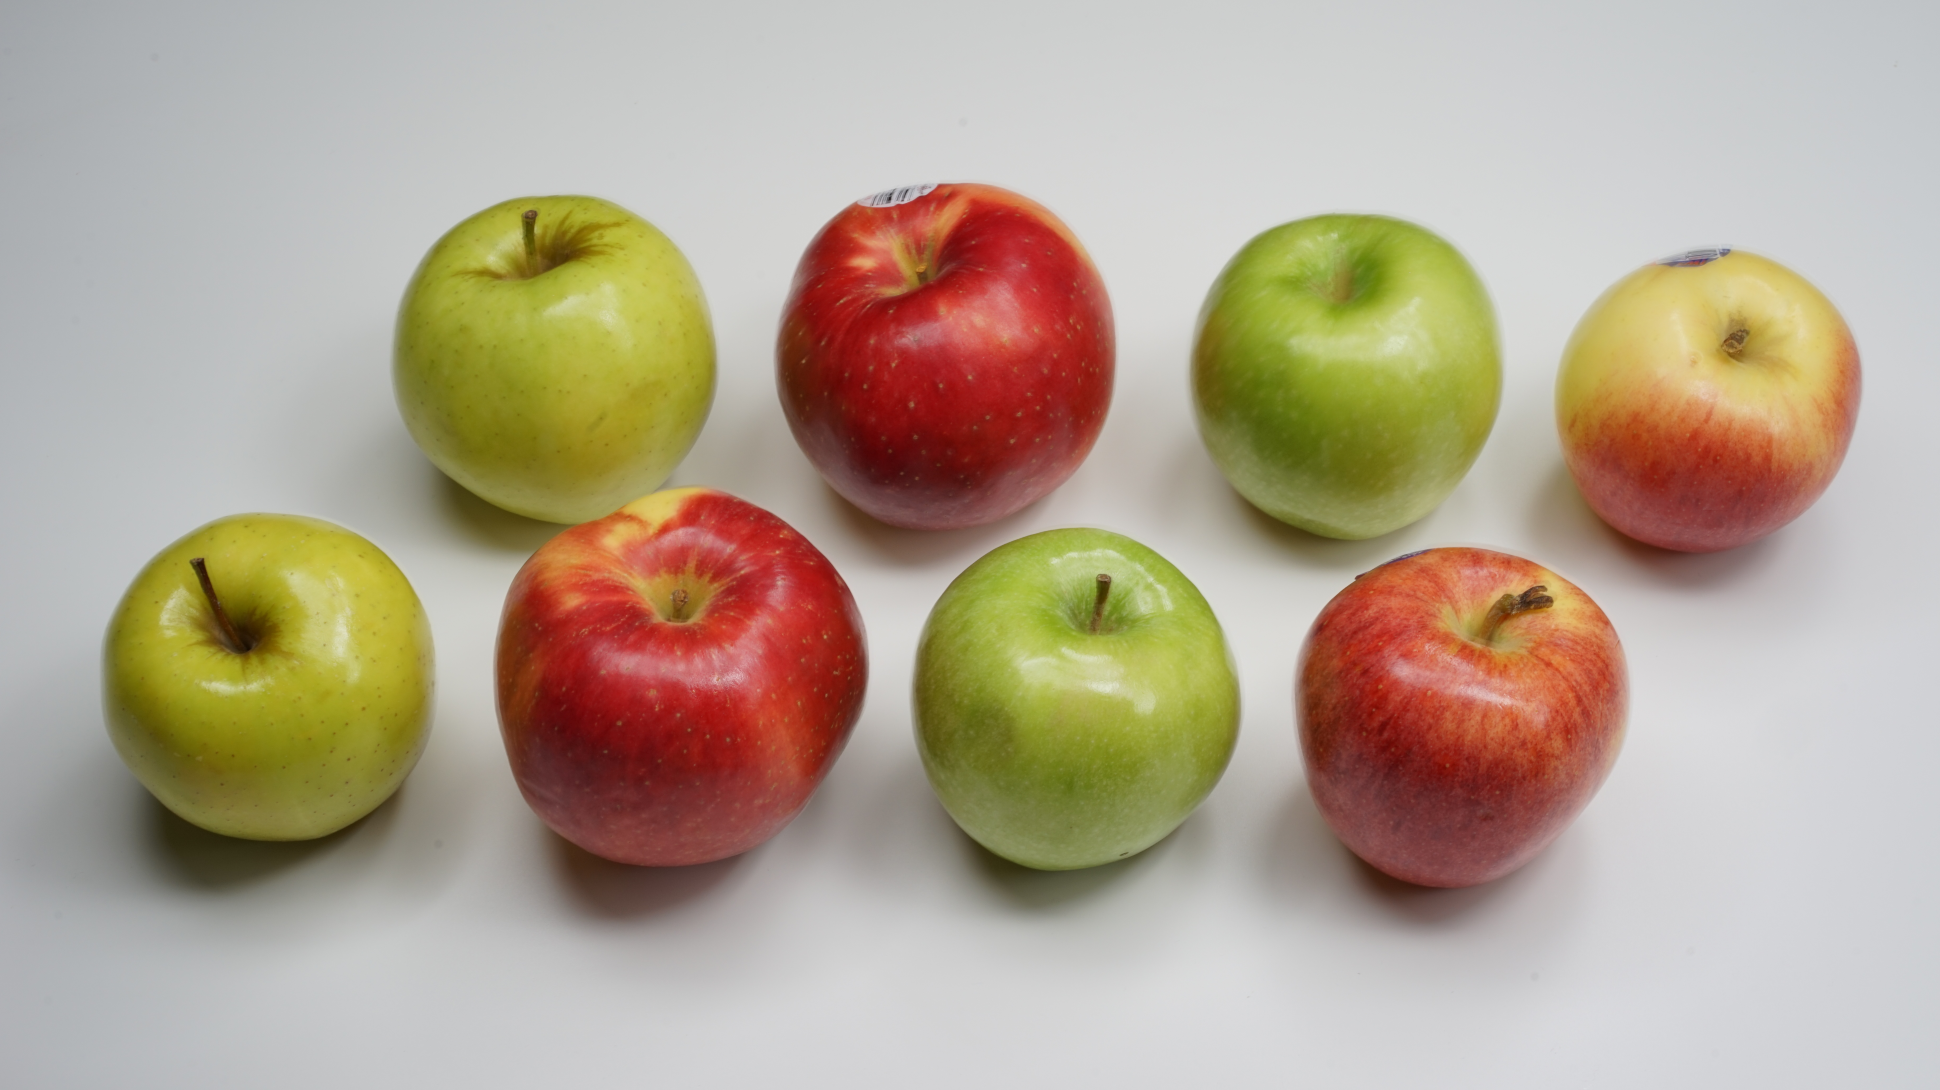 Several apples, both green and red, large and small